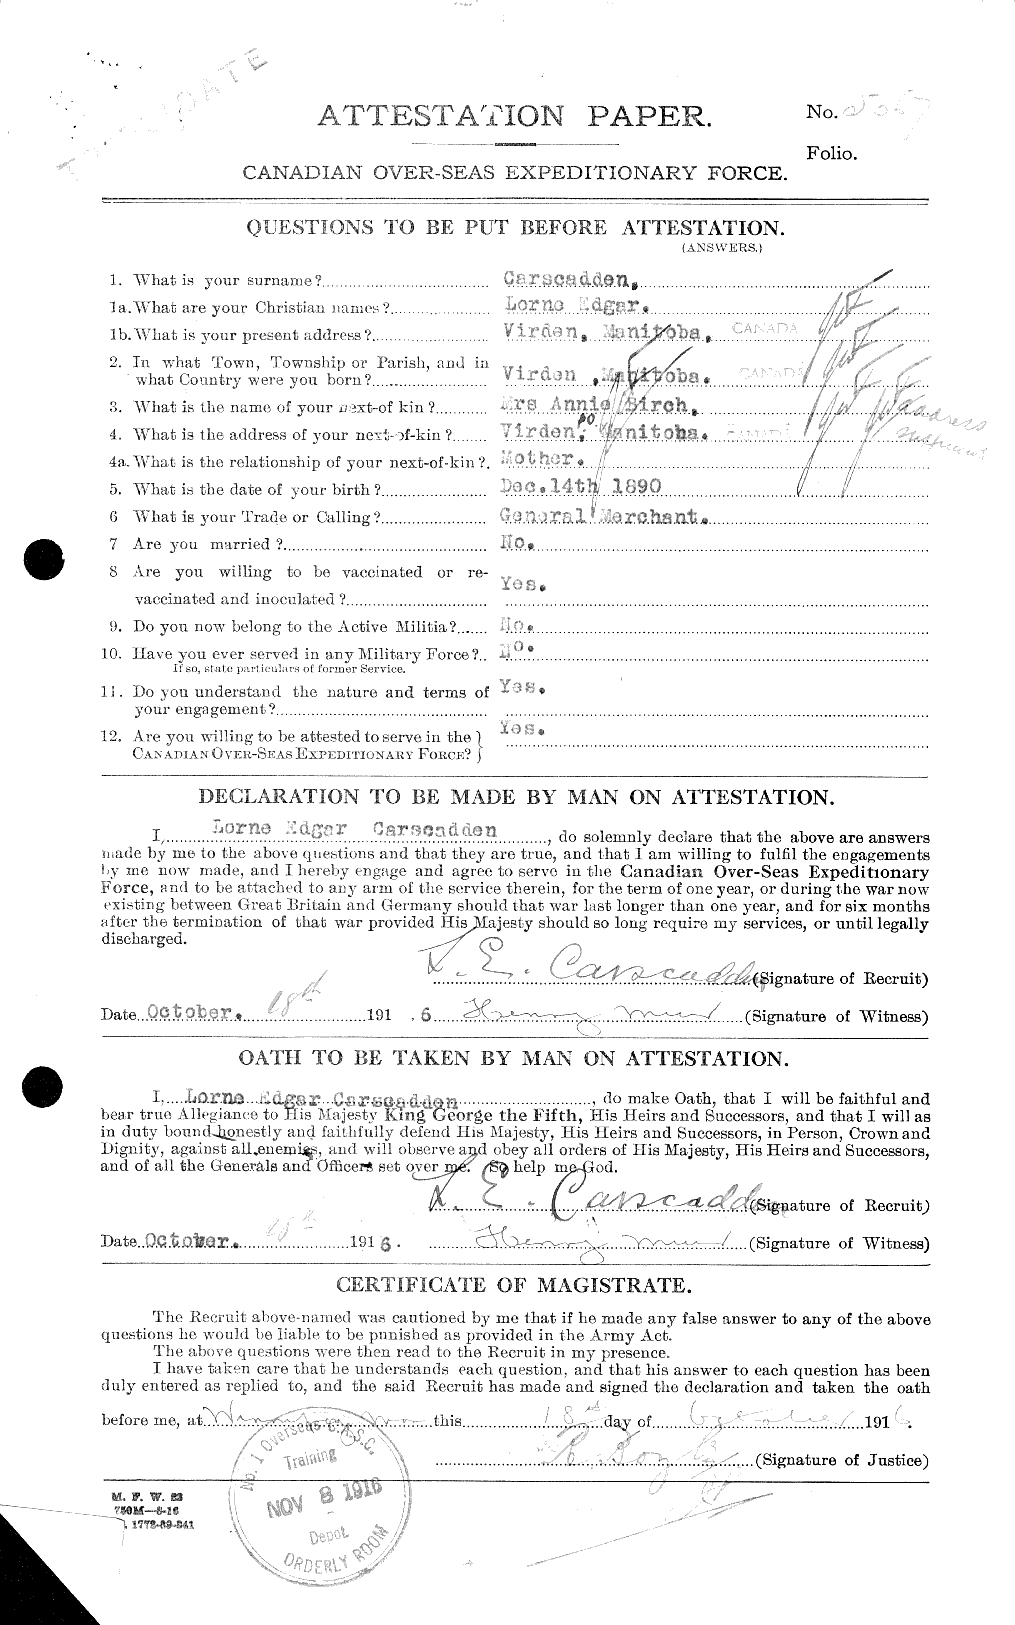 Personnel Records of the First World War - CEF 011480a